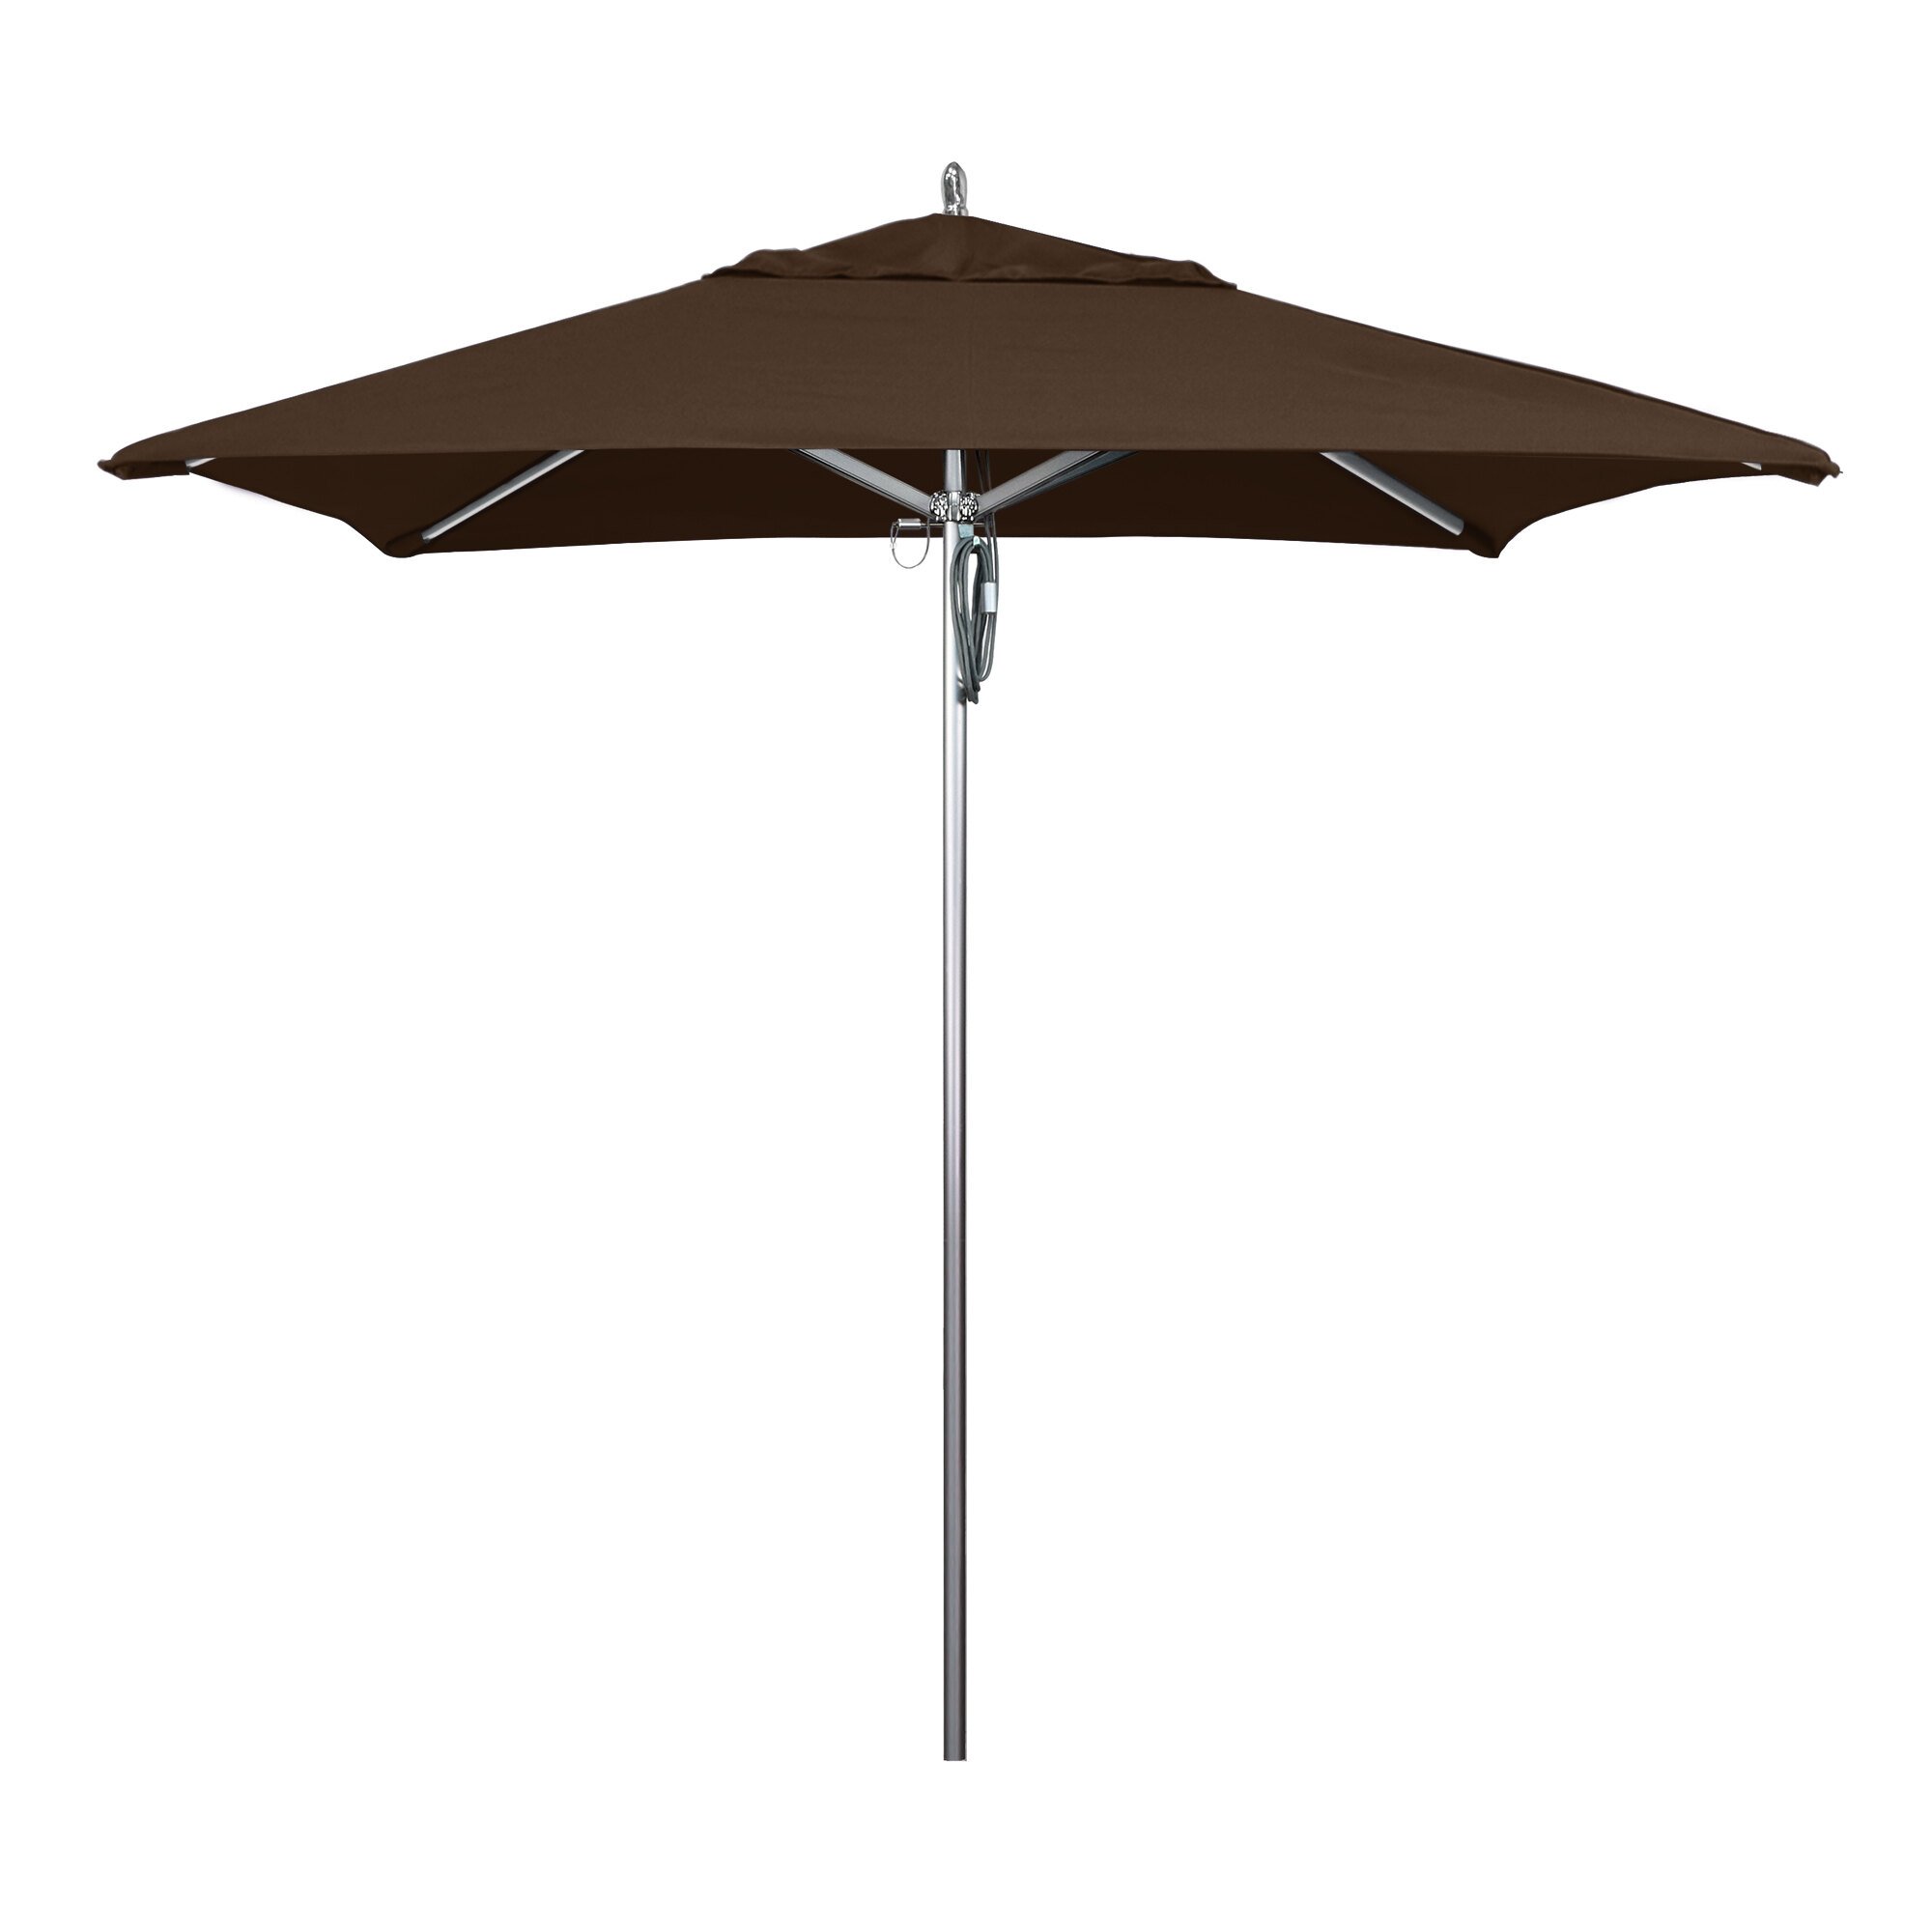 Pulley lift umbrella with brown canopy